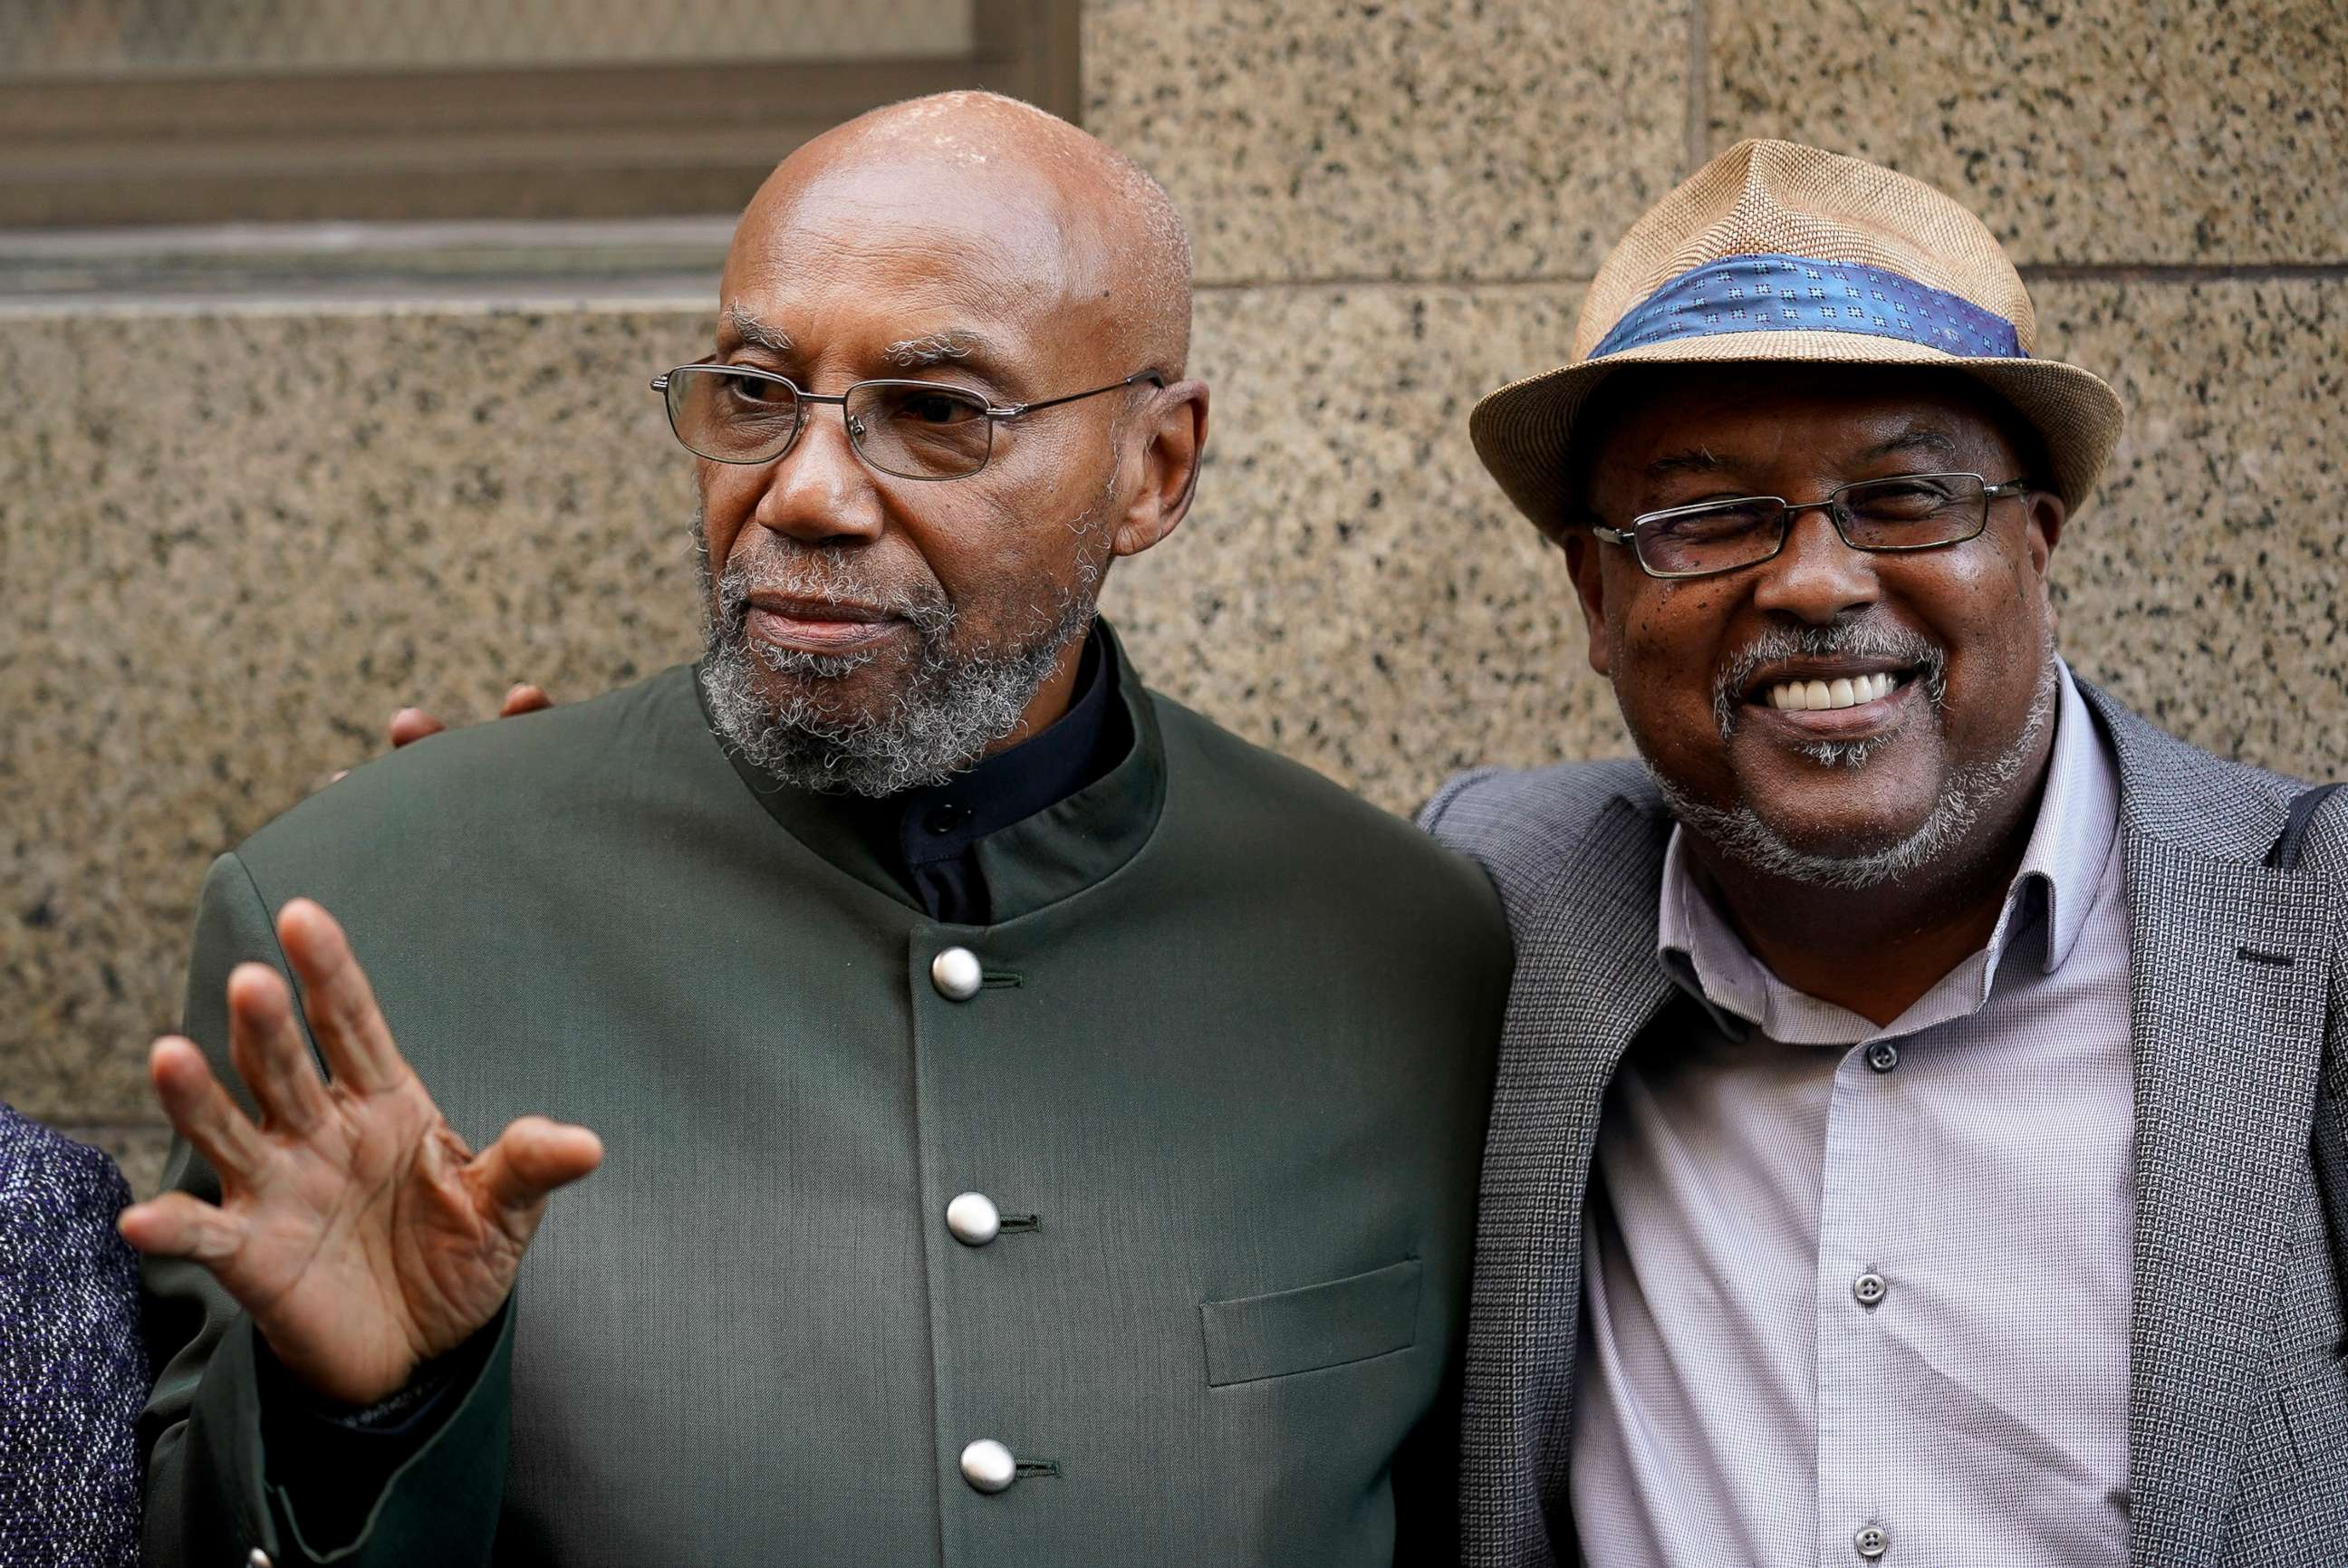 PHOTO: Muhammad Aziz stands outside Manhattan court with journalist Abdur-Rahmman Muhammad, after Aziz's conviction in the killing of Malcolm X was vacated, Nov. 18, 2021, in New York.  